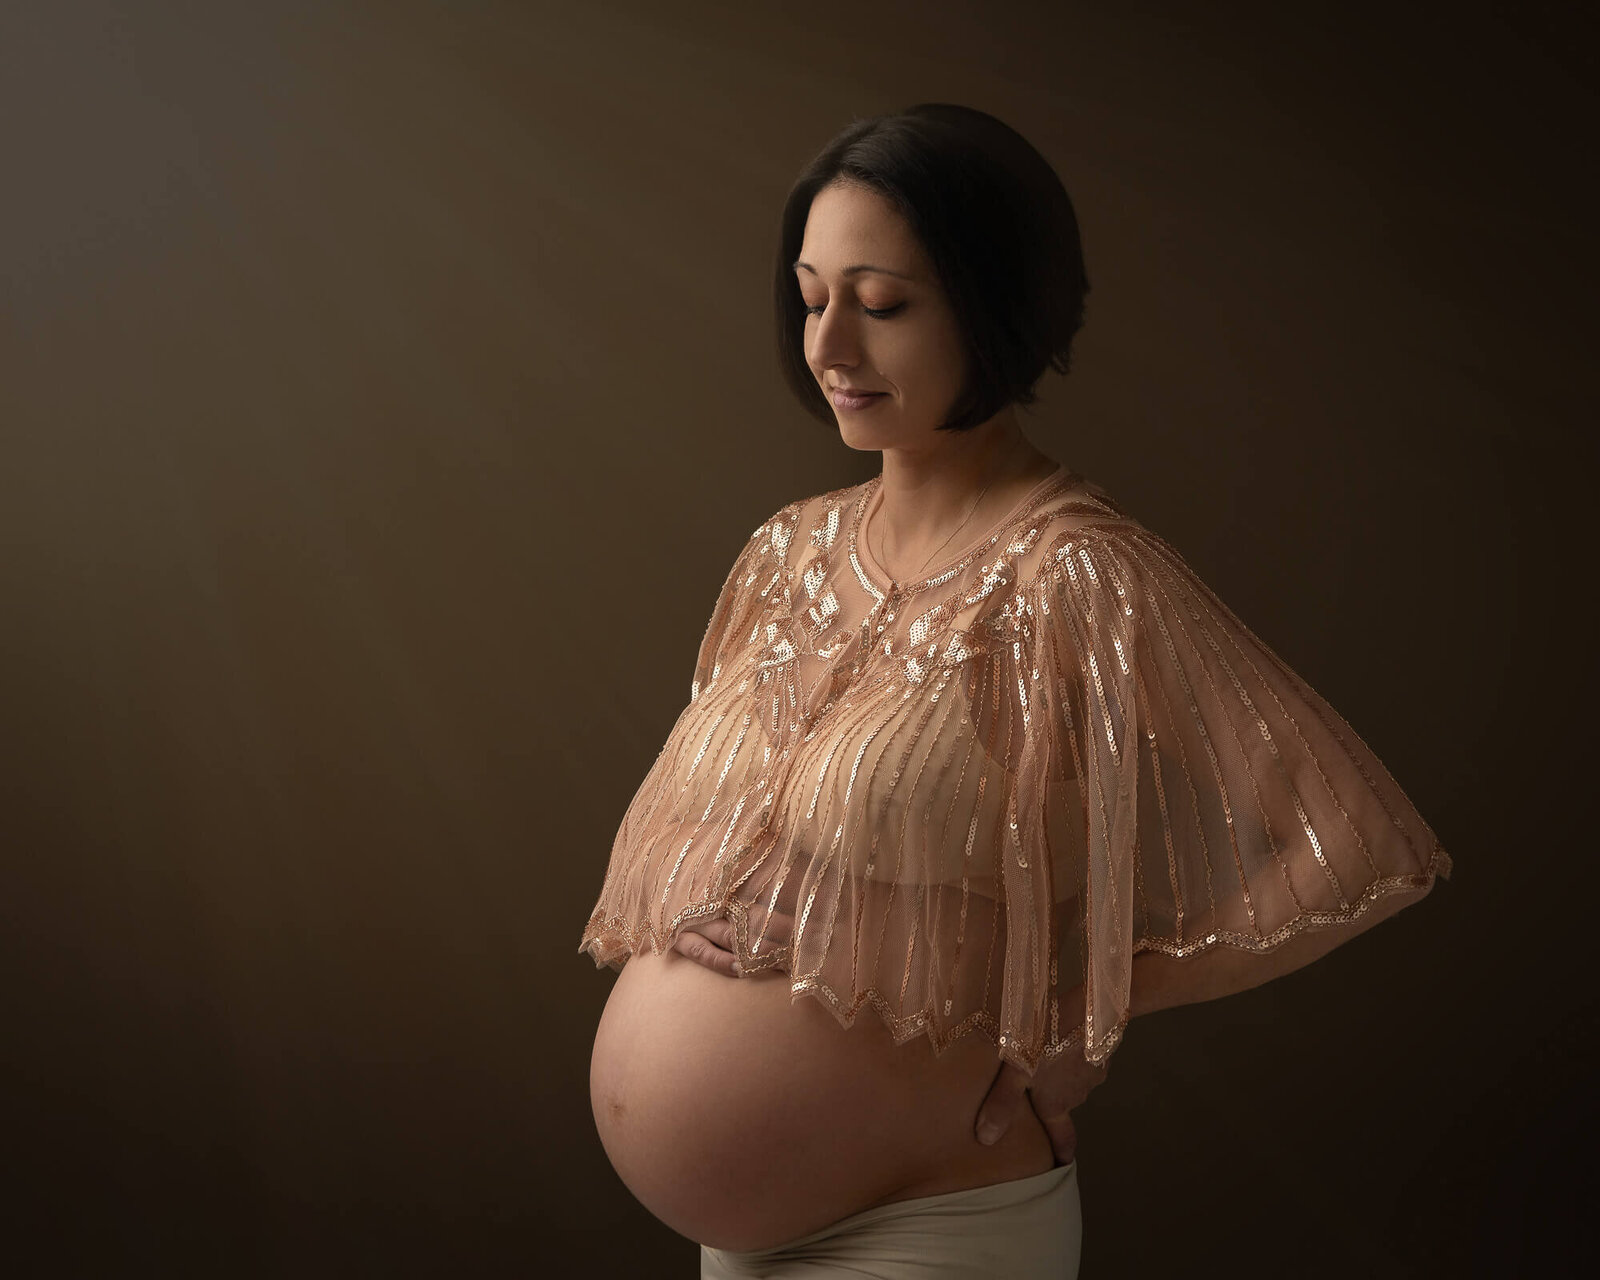 golden light falling on pregnant belly, maternity picture